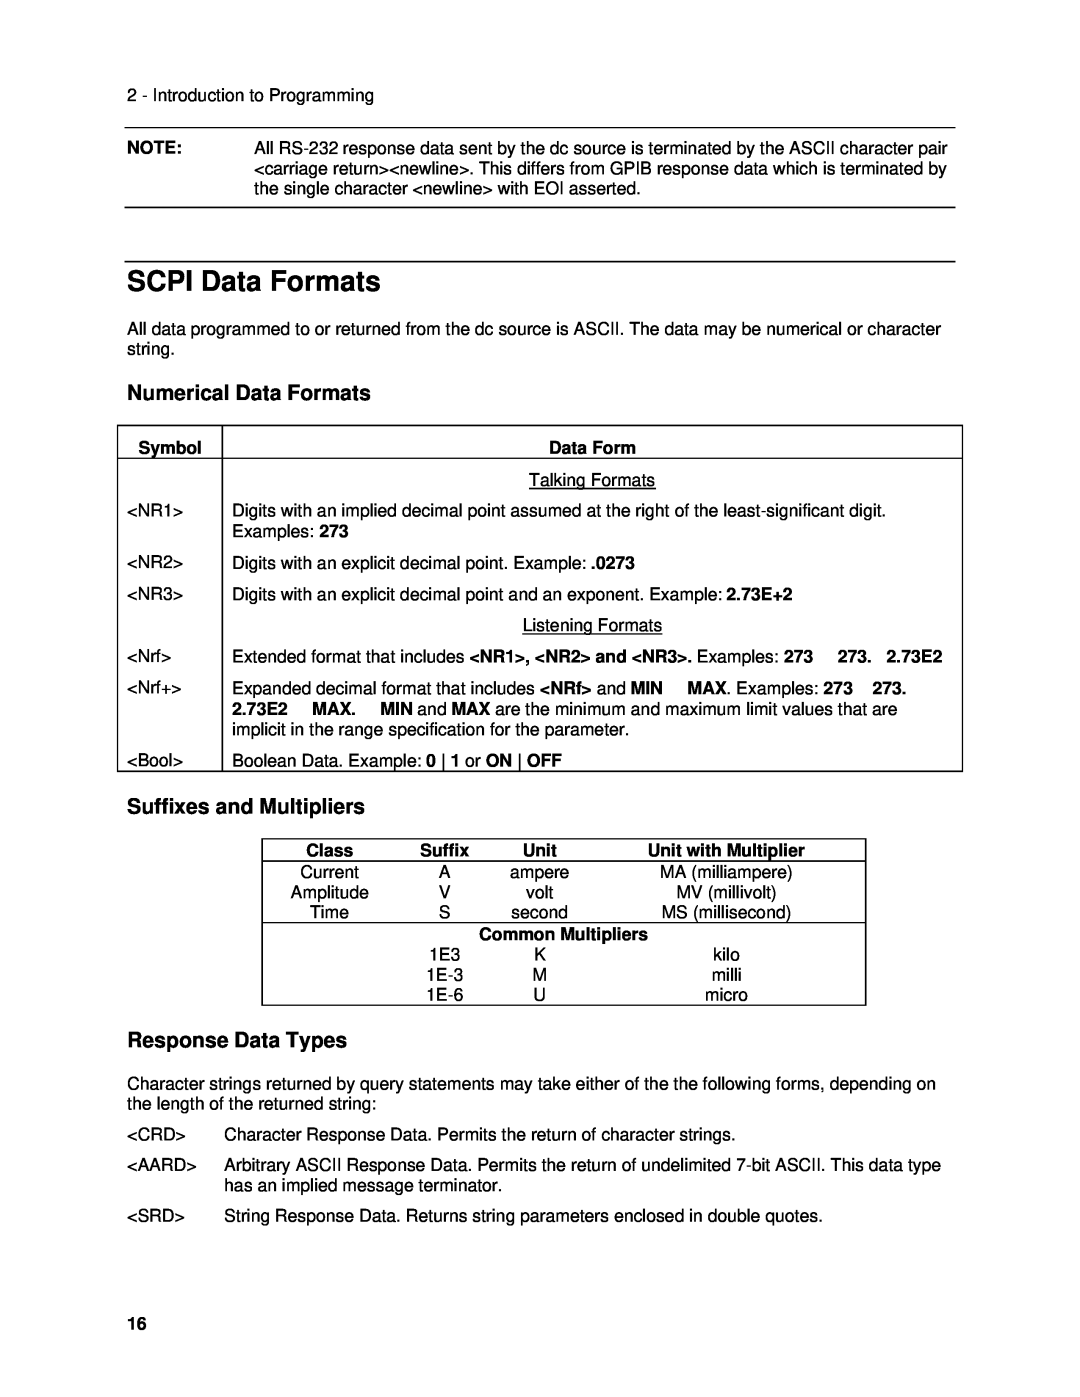 Agilent Technologies 6631B, 6634B SCPI Data Formats, Numerical Data Formats, Suffixes and Multipliers, Response Data Types 